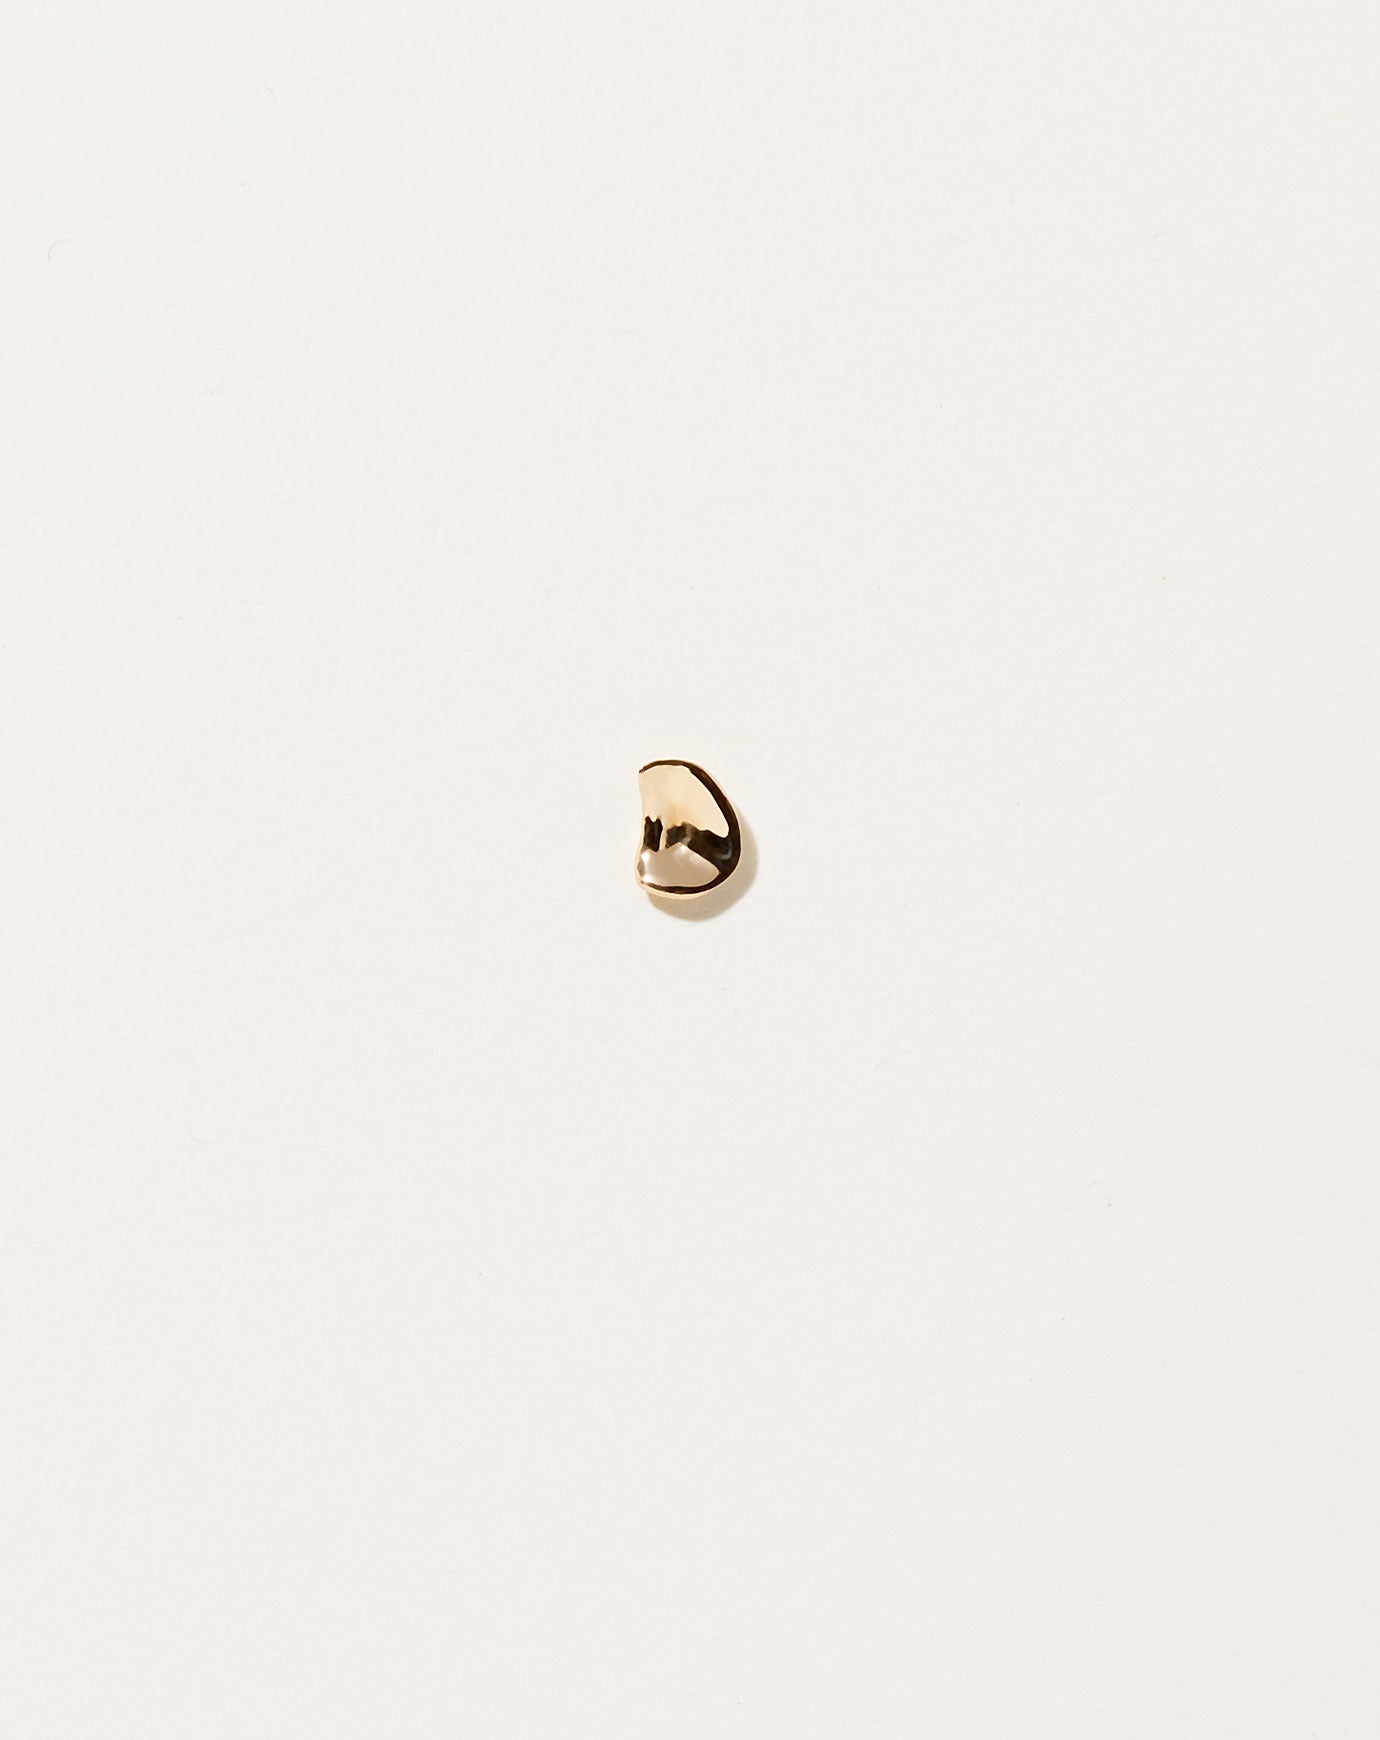 Quarry Concave Earring in Gold